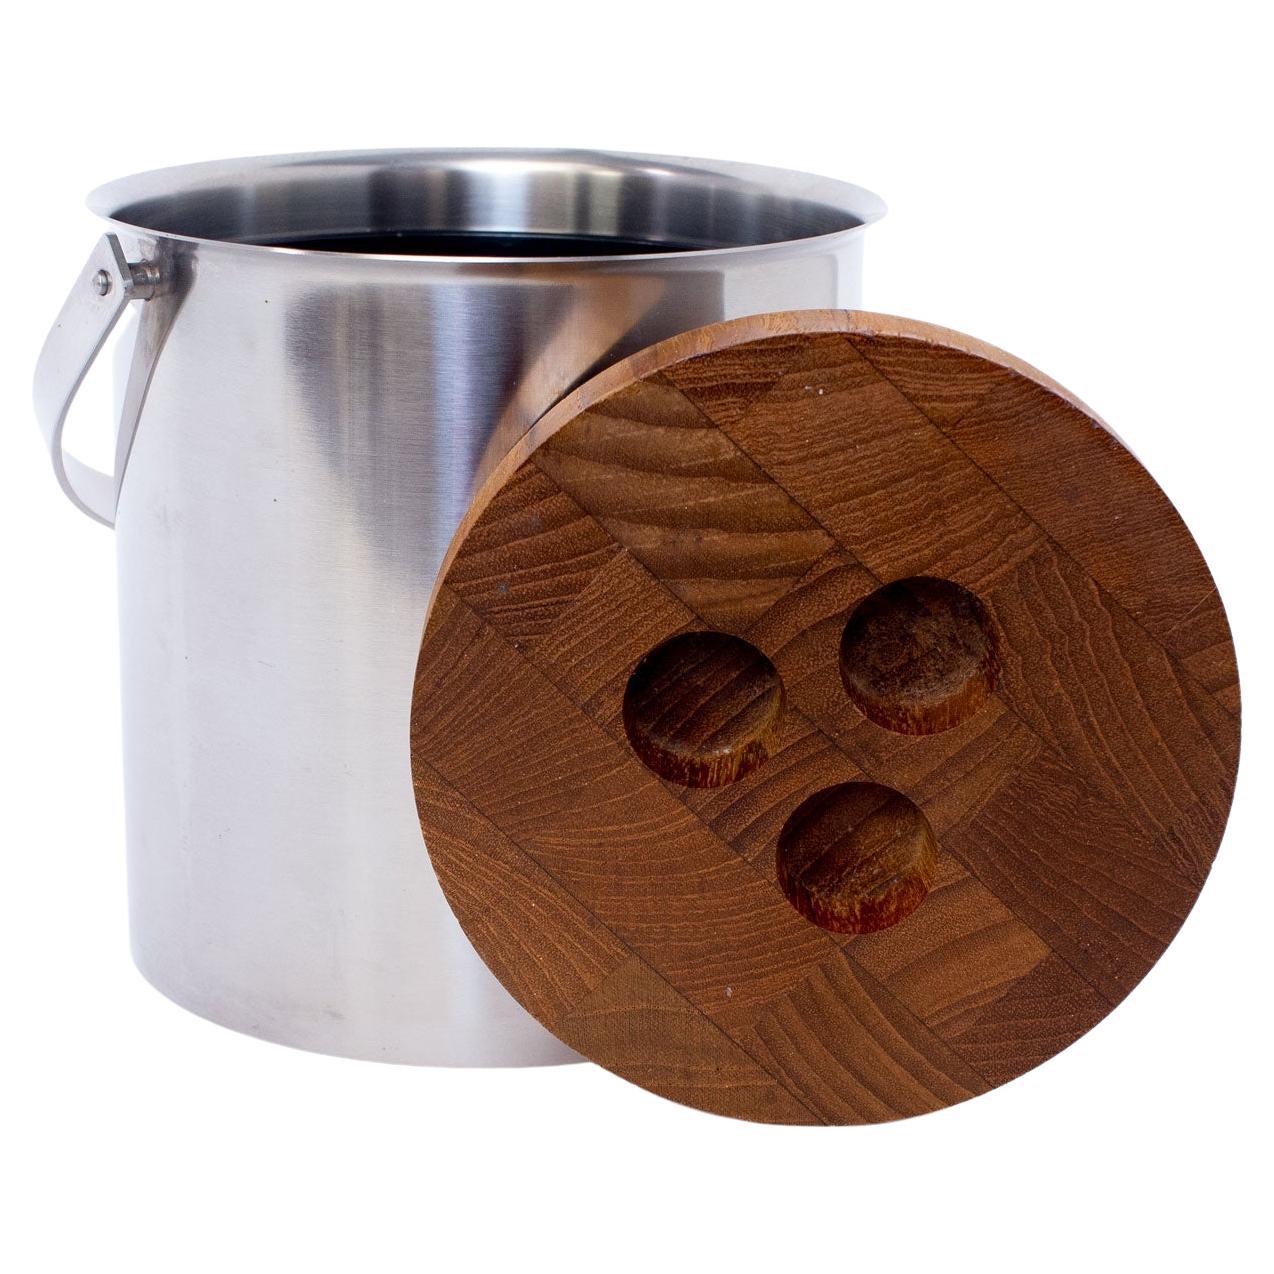 Stelton Teak and Stainless Steel Ice Bucket by Arne Jacobsen, 1960s For Sale